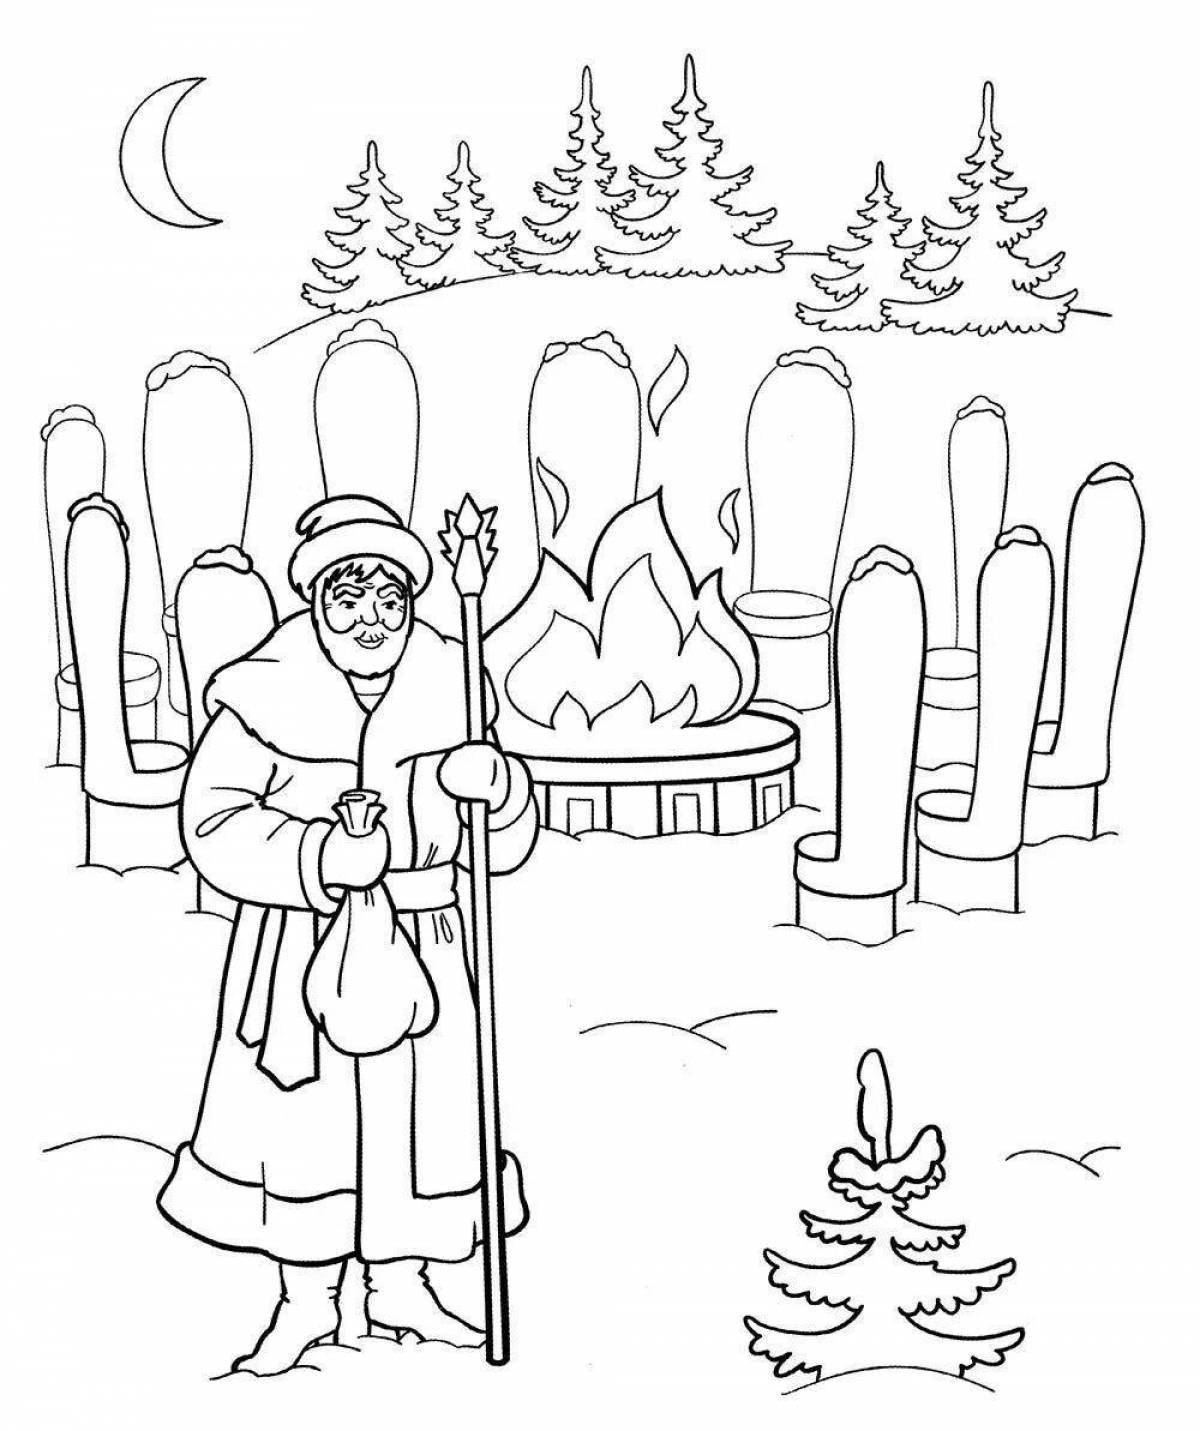 Majestic winter months coloring book